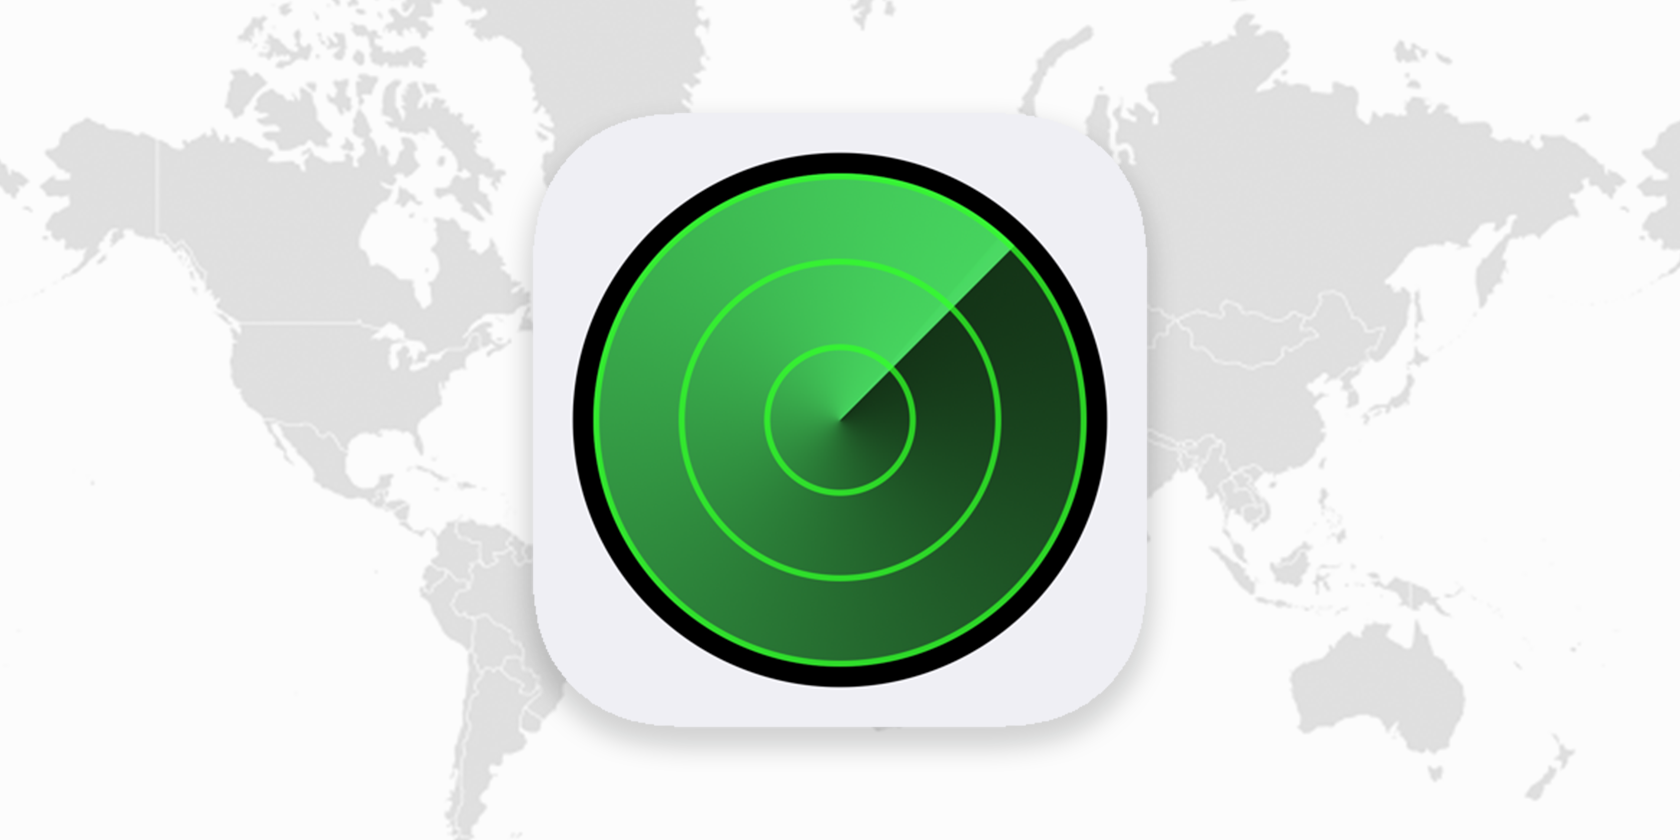 The Find My app icon on top of a world map